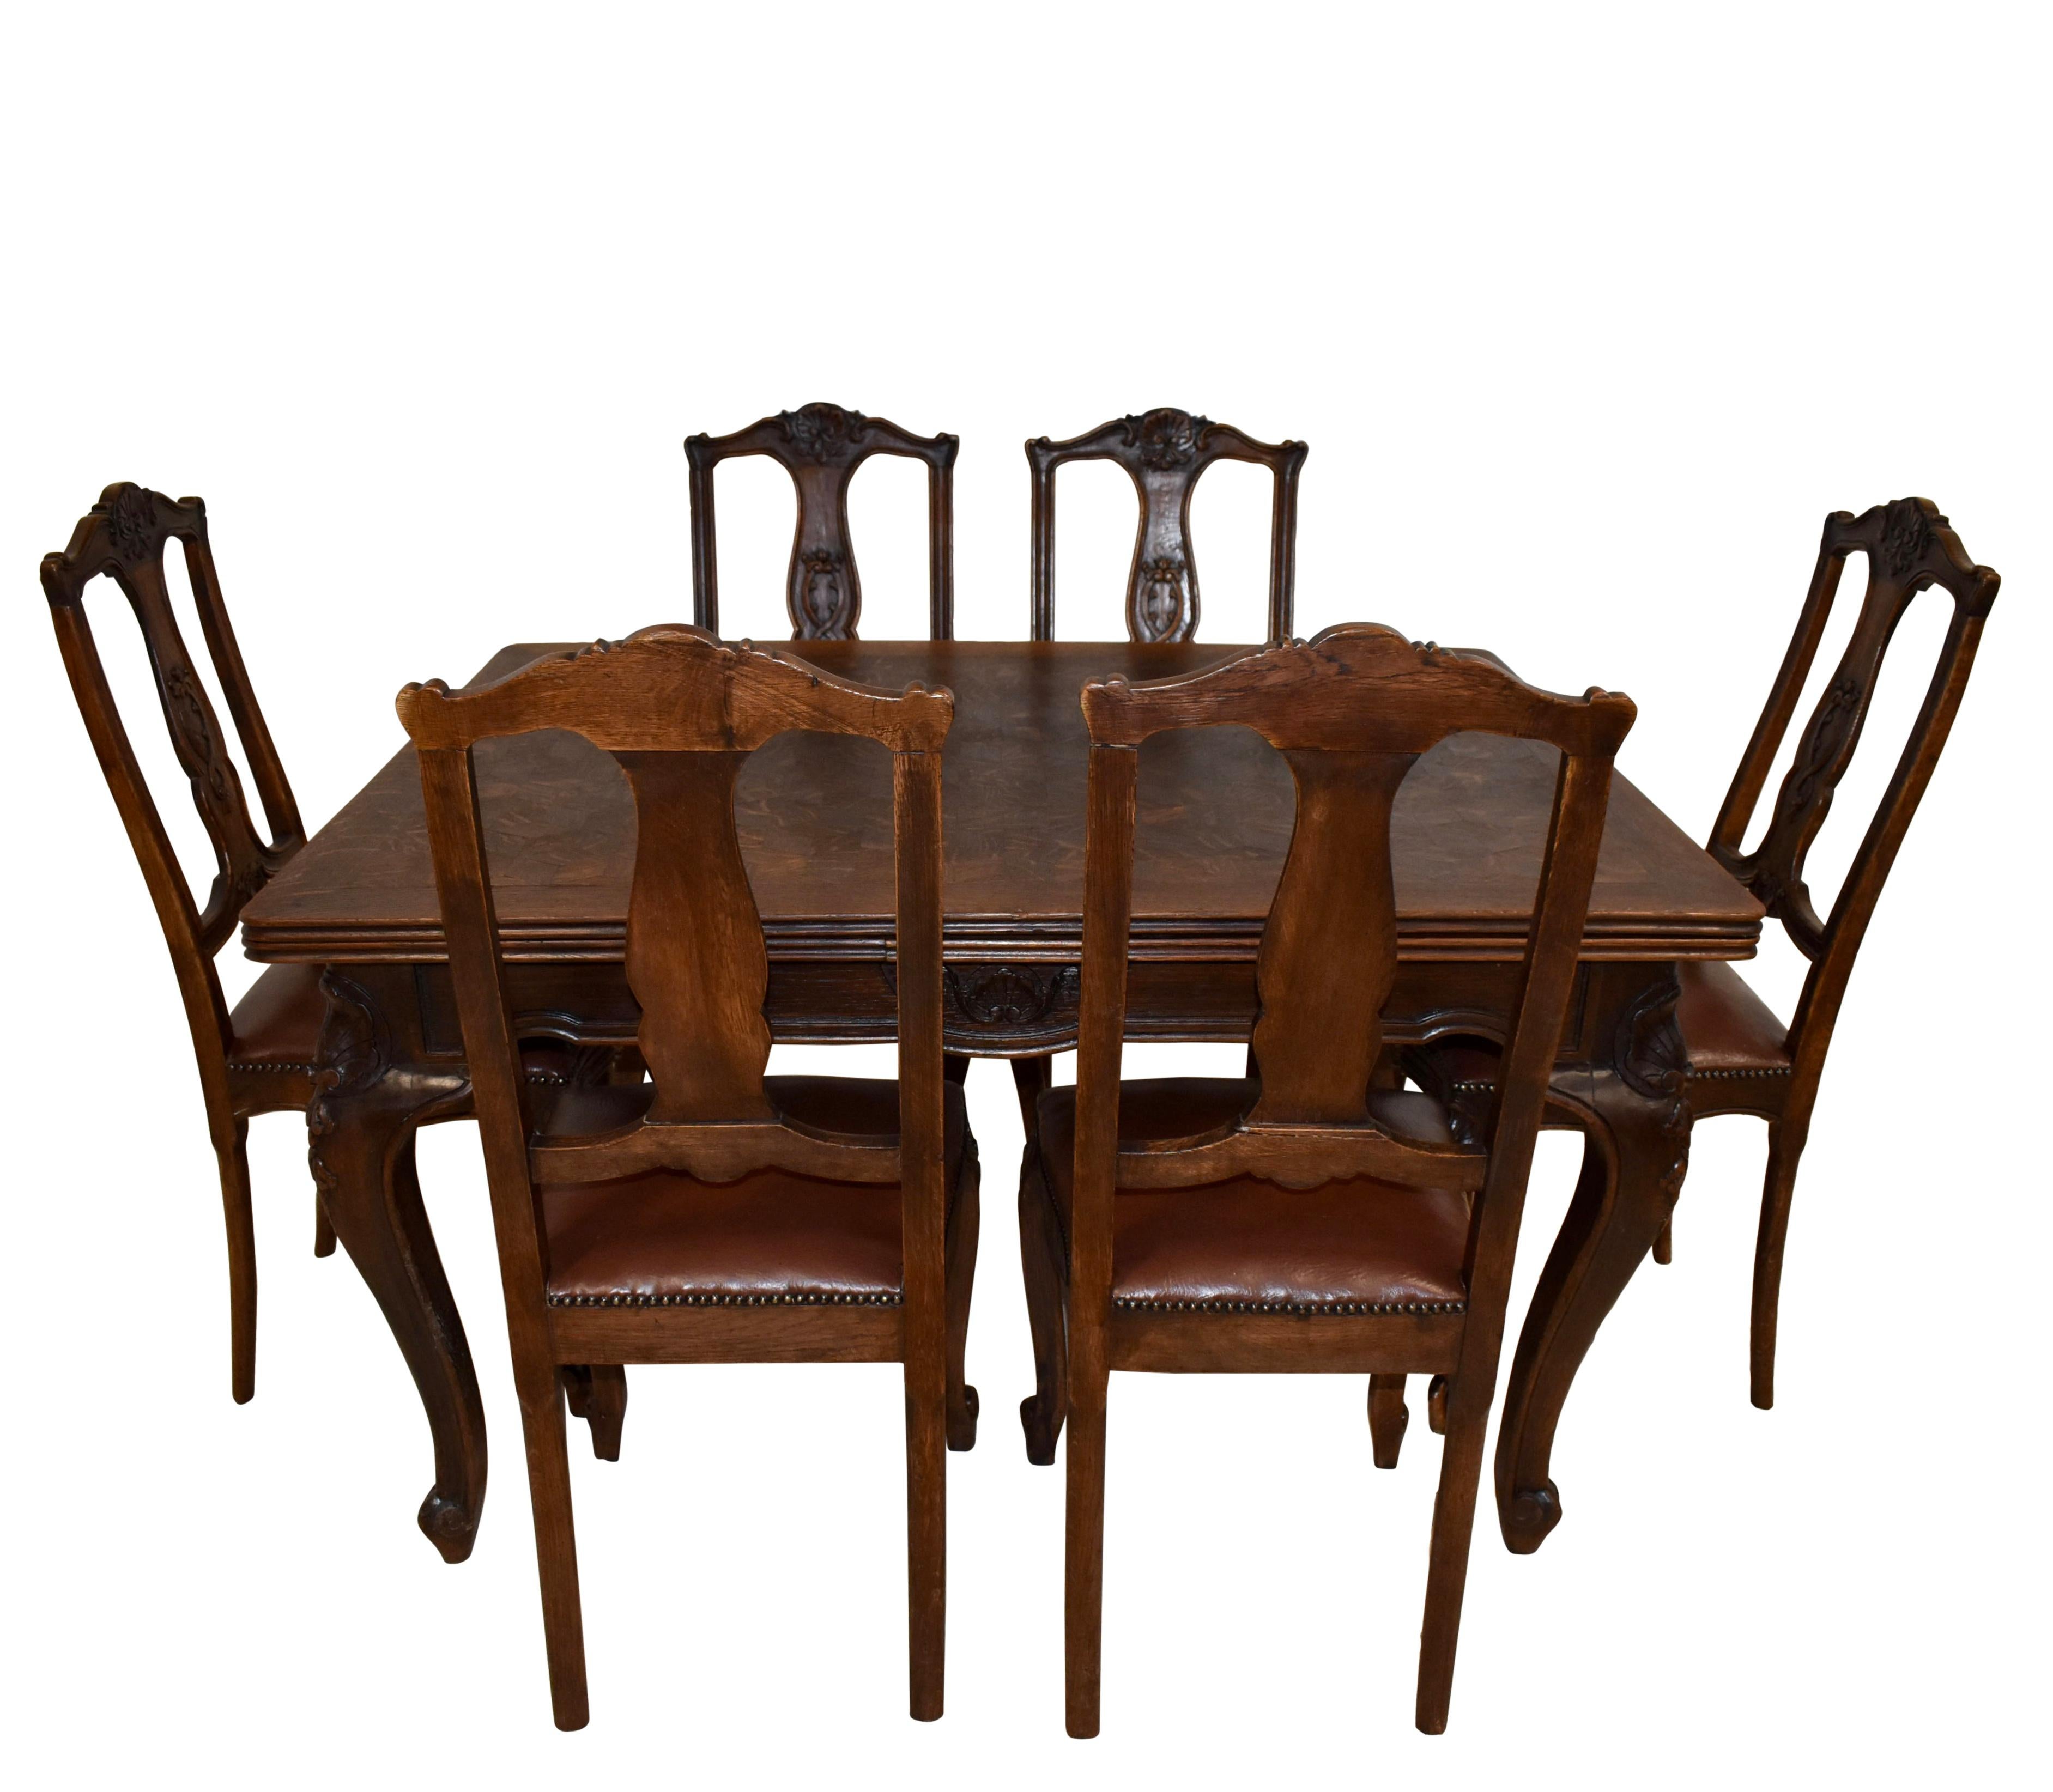 Comprised of a beautiful parquet table and six upholstered chairs, this oak dining set pairs versatility and style to create a stunning set. The table's parquet is crafted from quarter-sawn oak, which produces a distinctive grain that gives the